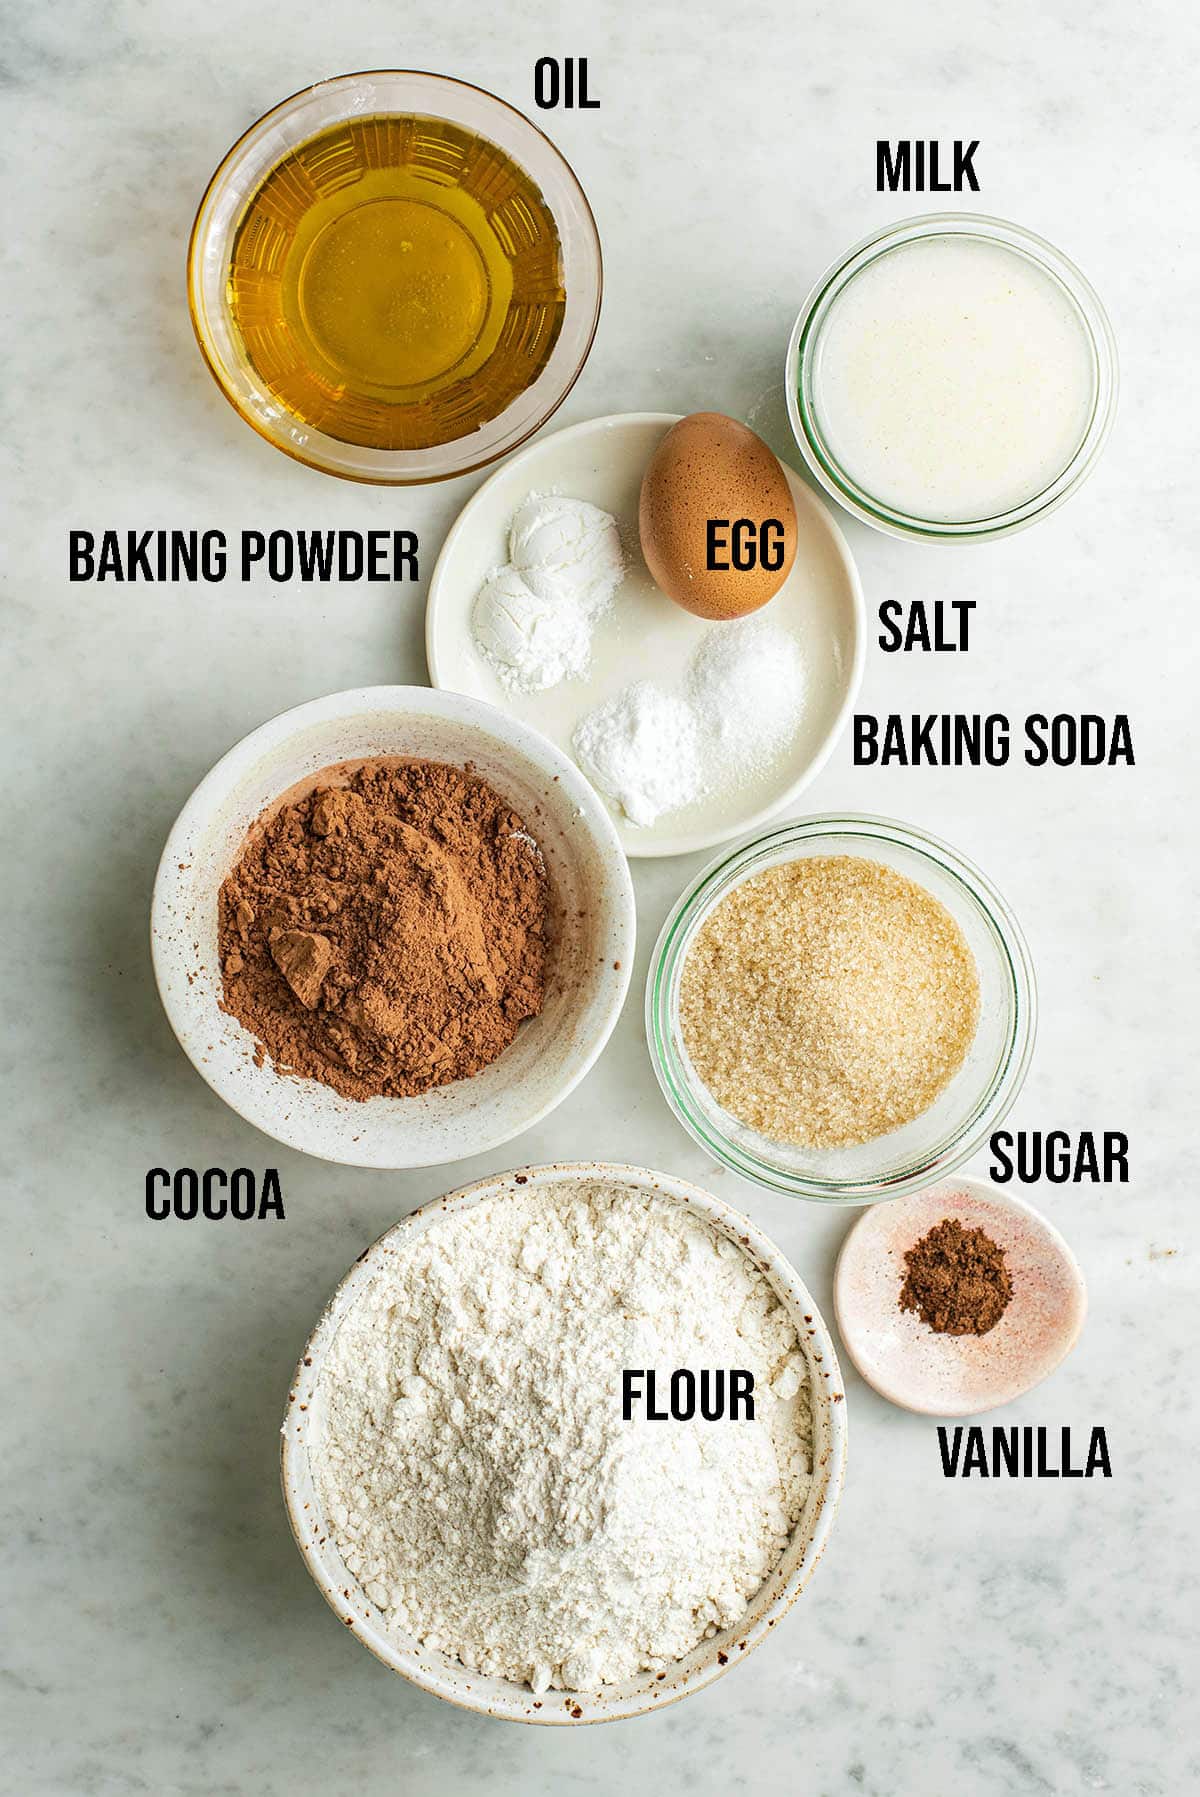 Chocolate cake ingredients with labels.